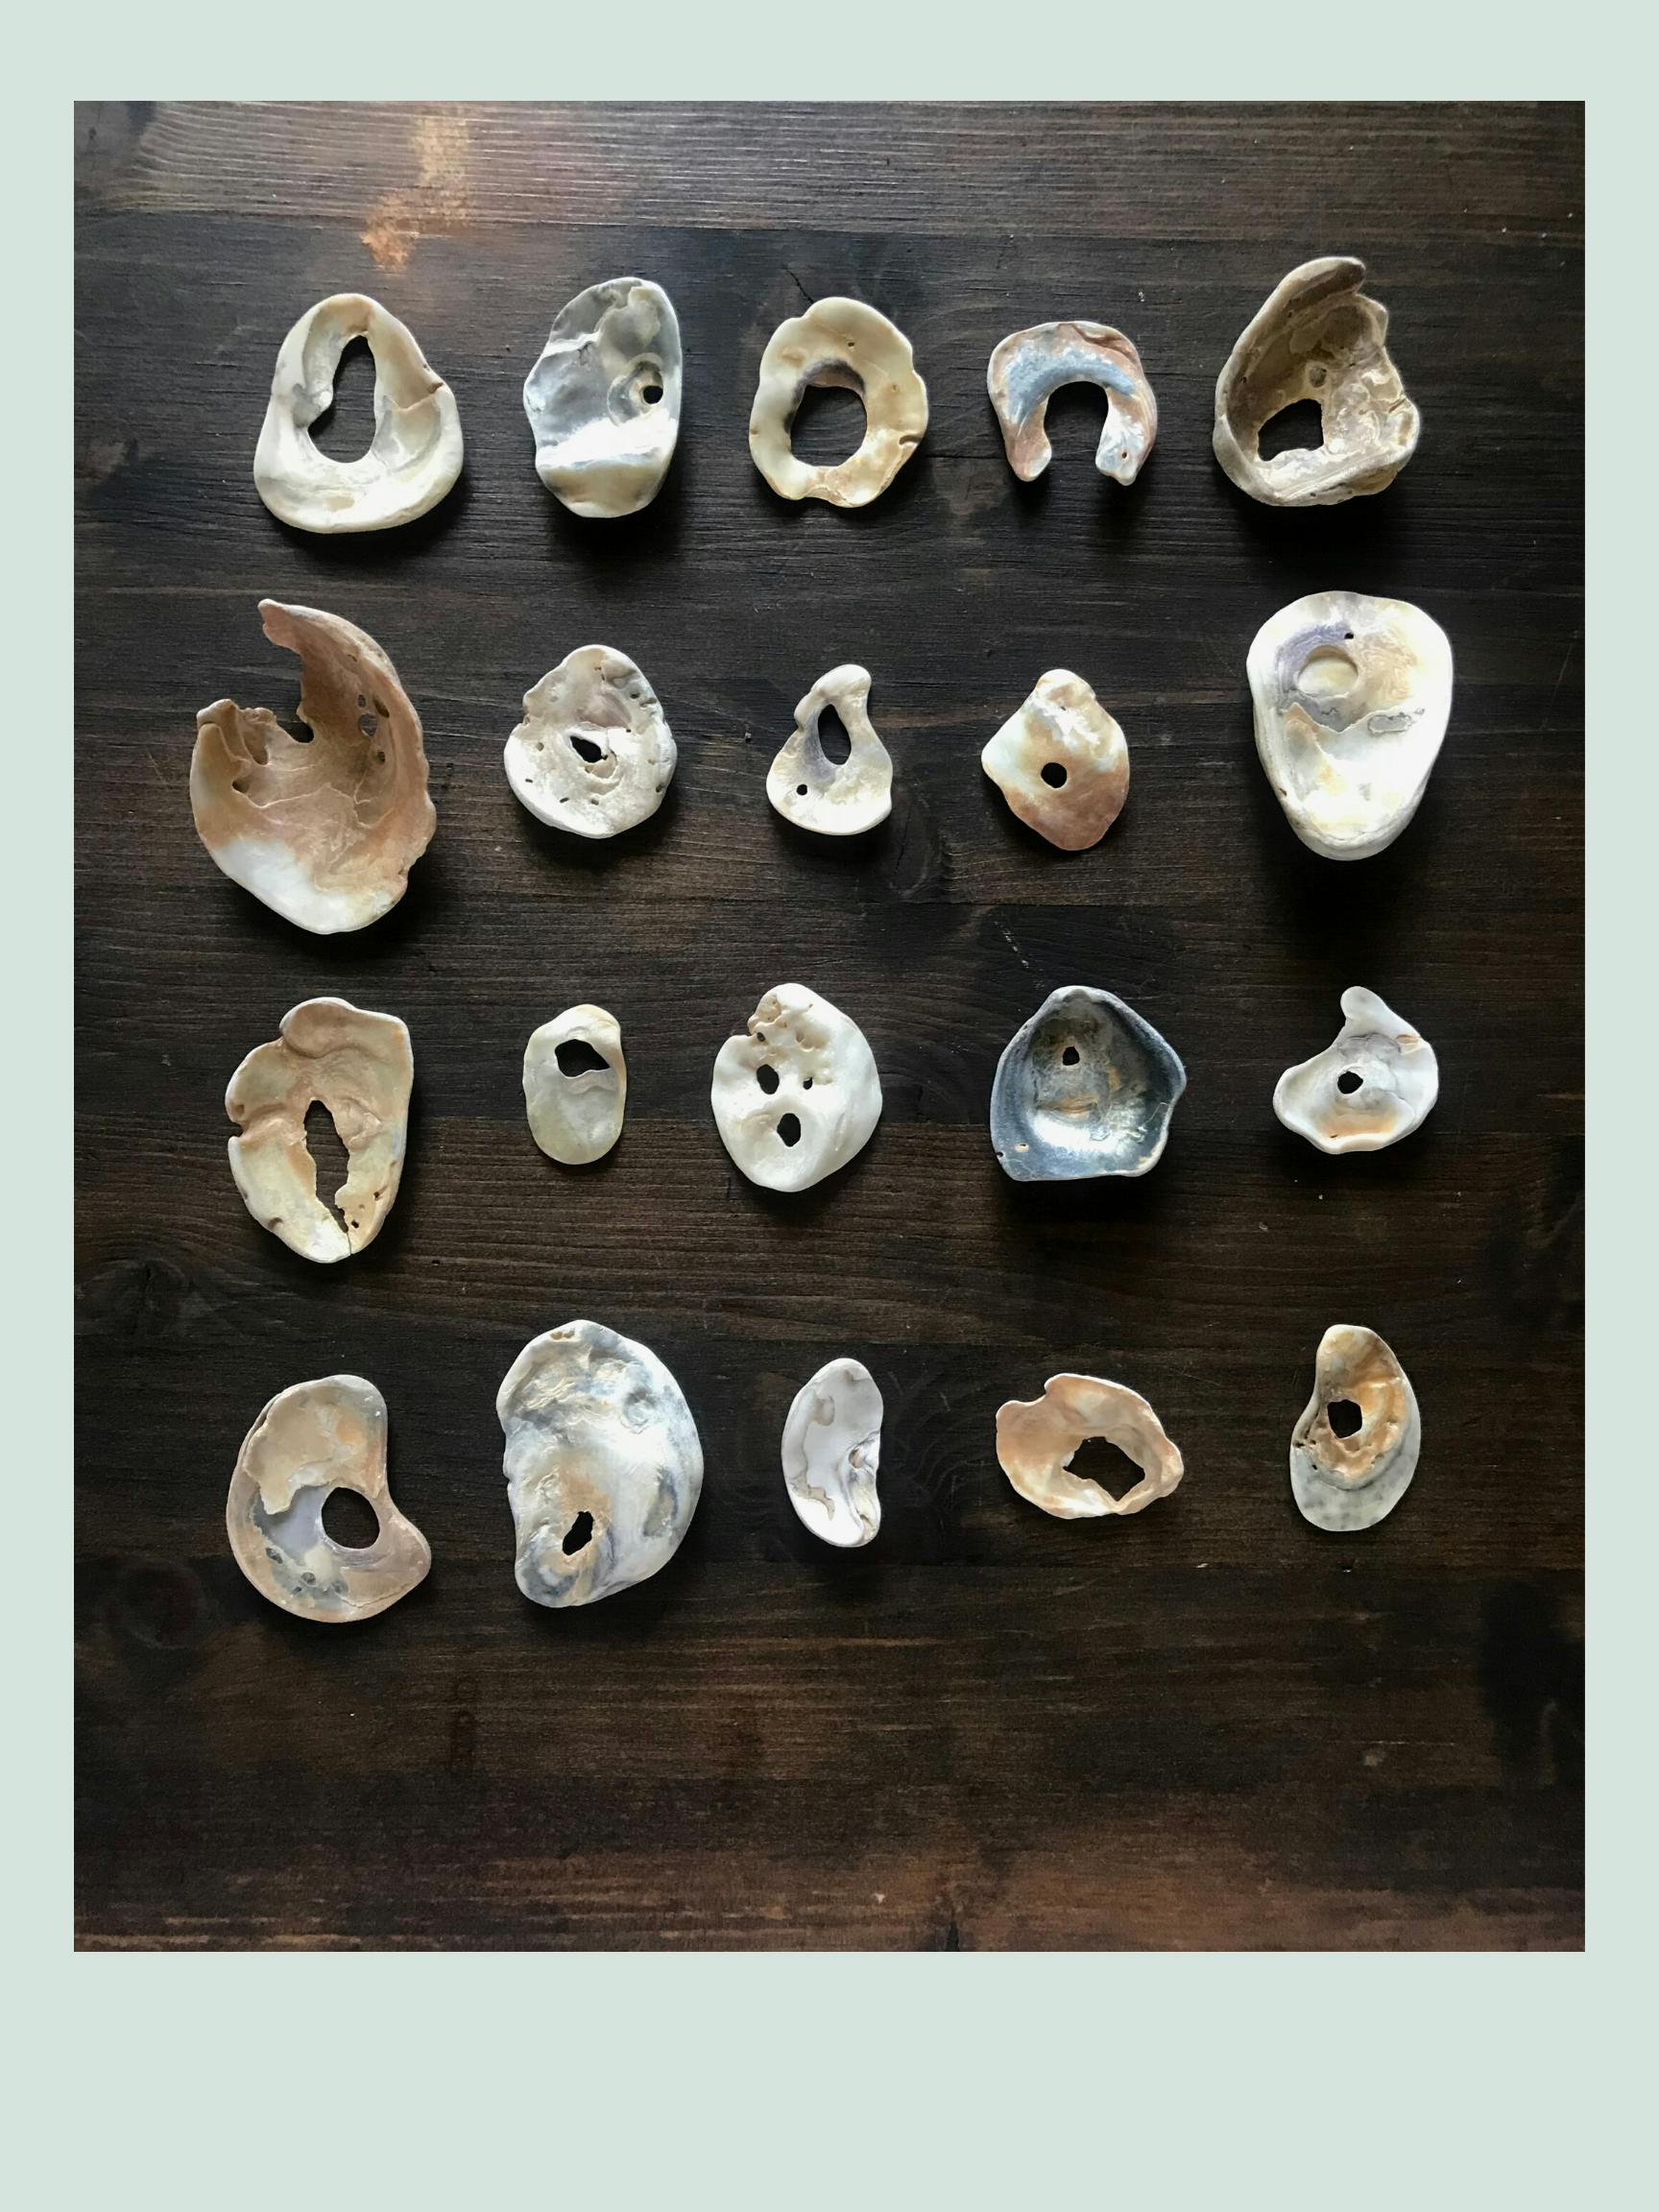 a collection of oyster shells, ranging from blue to orange-peach to white, is placed in rows on a desk. Each shell has its own unique shape, but all of them have a gap or opening somewhere in them.